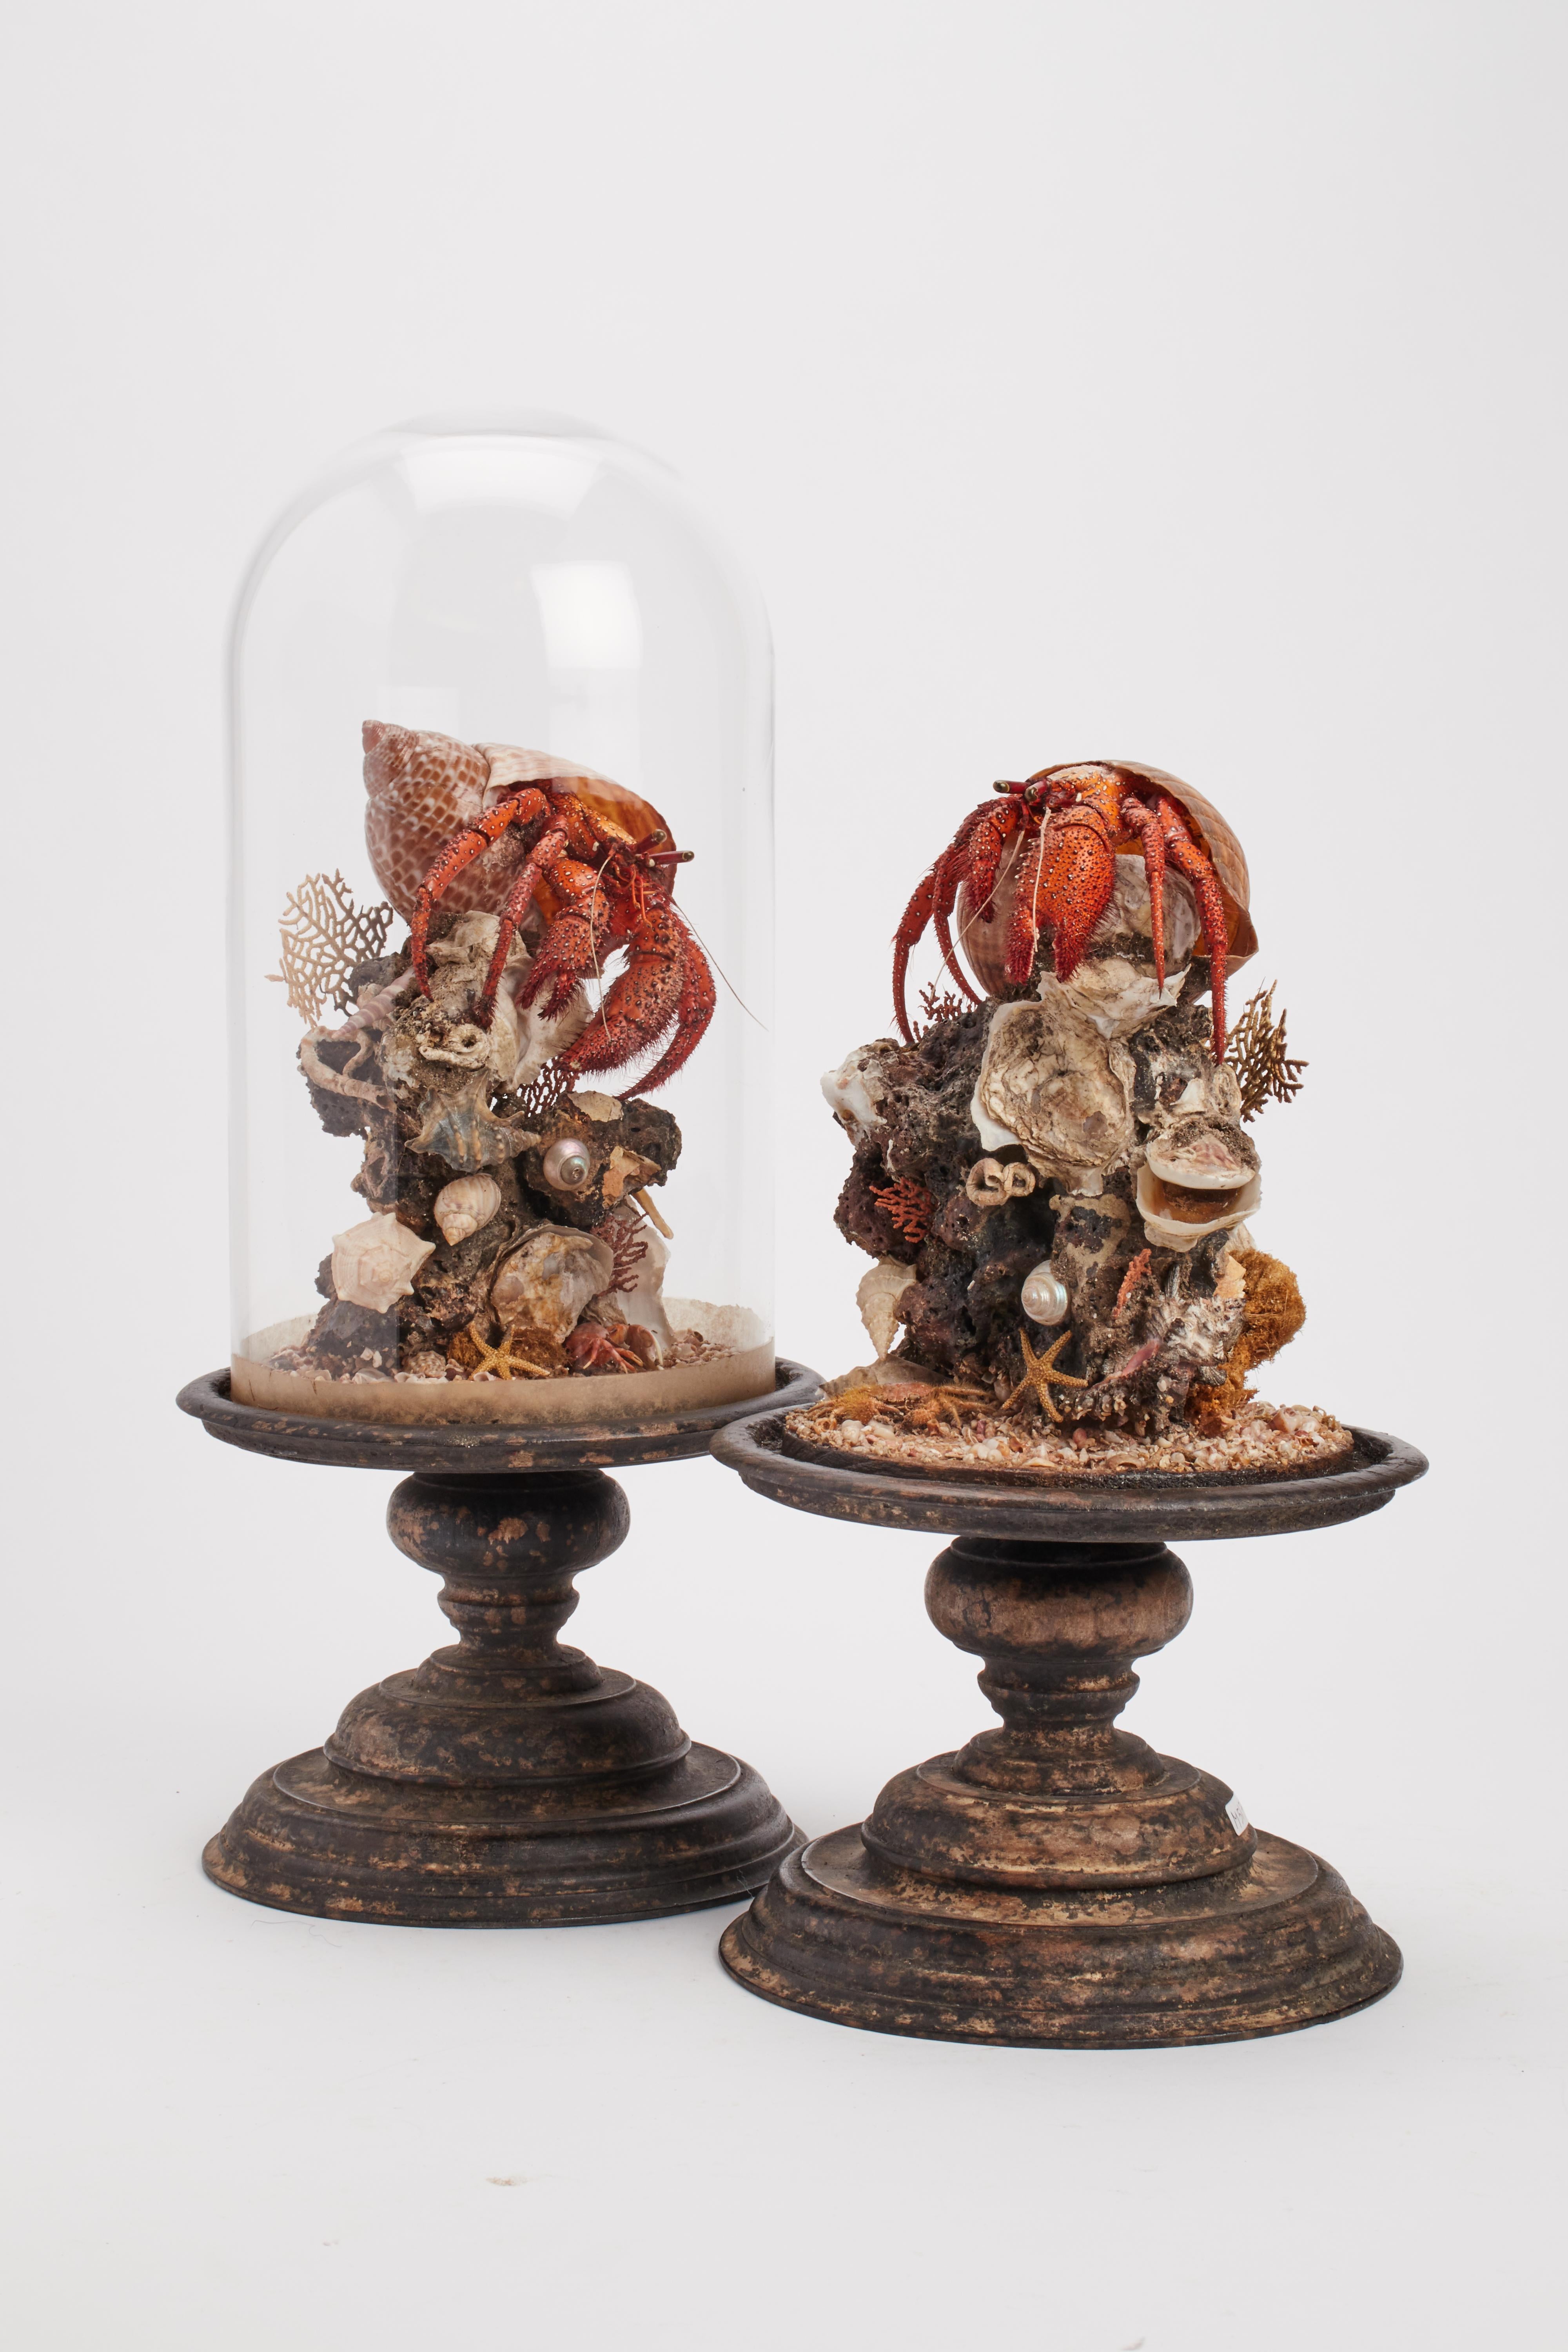 A natural Wunderkammer specimen a pair of the marine diorama with Hermit Crab (Pagurus Bernhardus) a brunch, fan-shaped of horny coral, starfish, reef, shells and little crab. The Specimens are mounted inside a glass dome, over a gray painted wooden